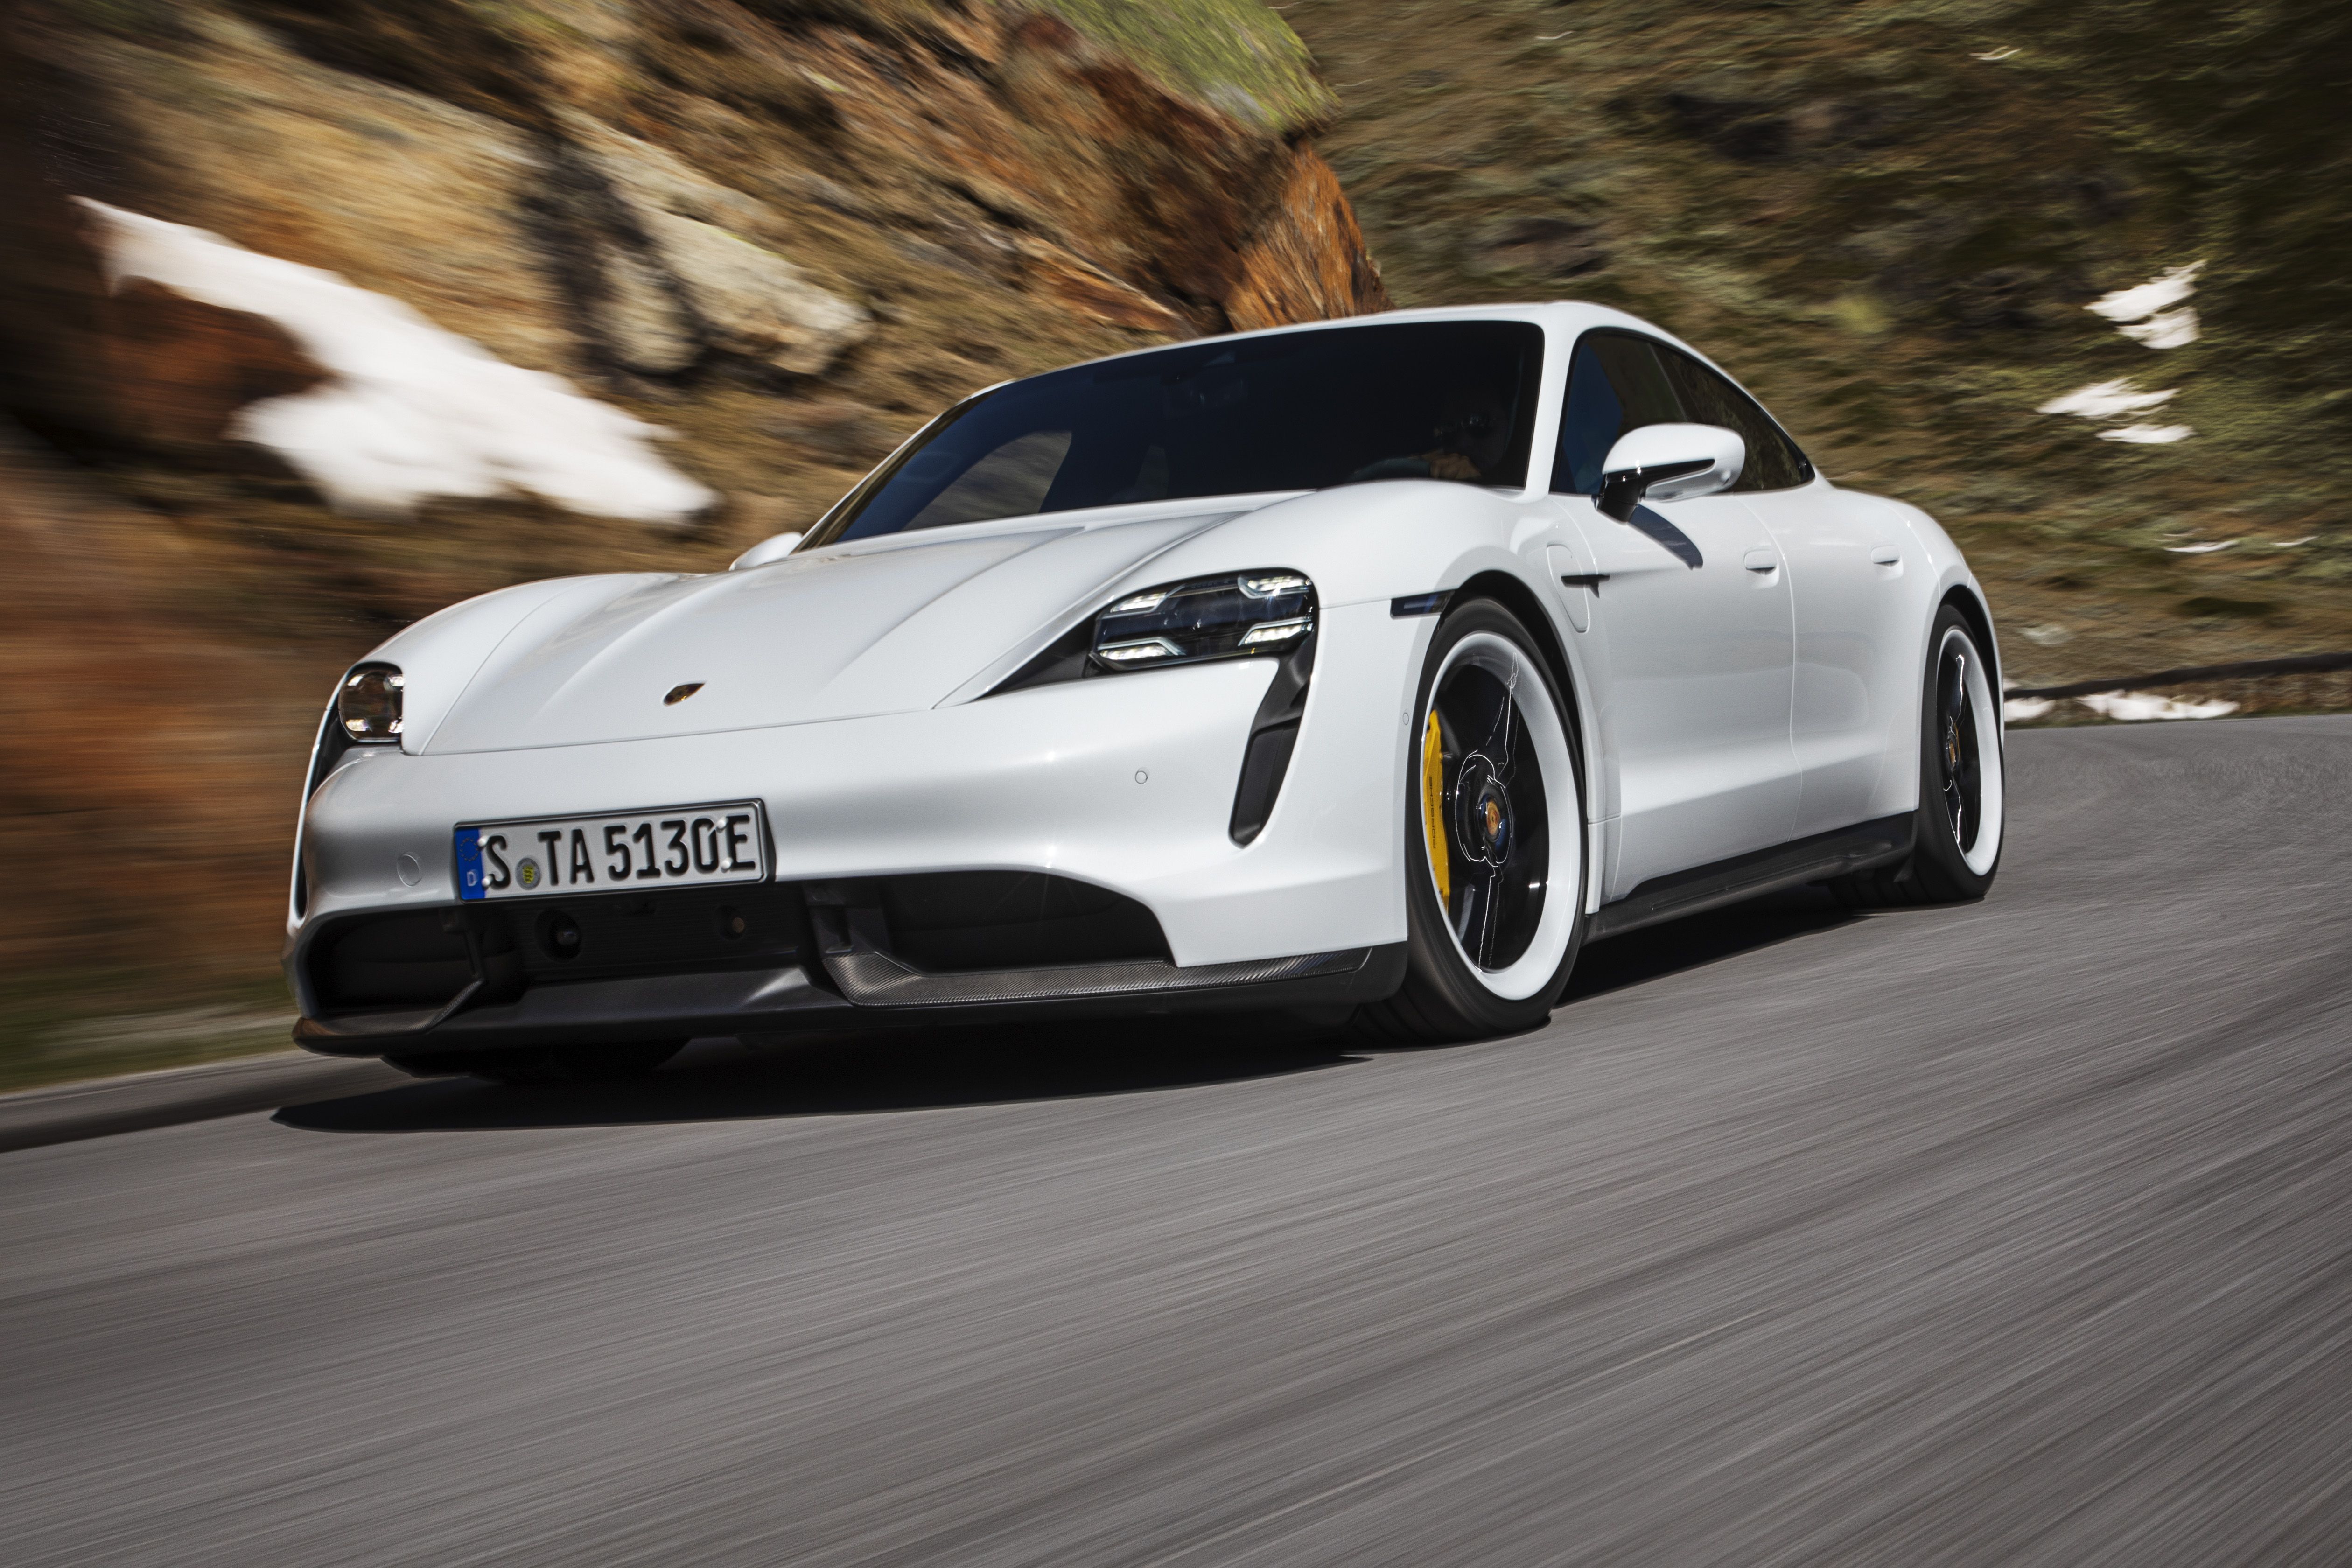 Porsche Taycan Turbo S Revealed With Photo, Specs and Price